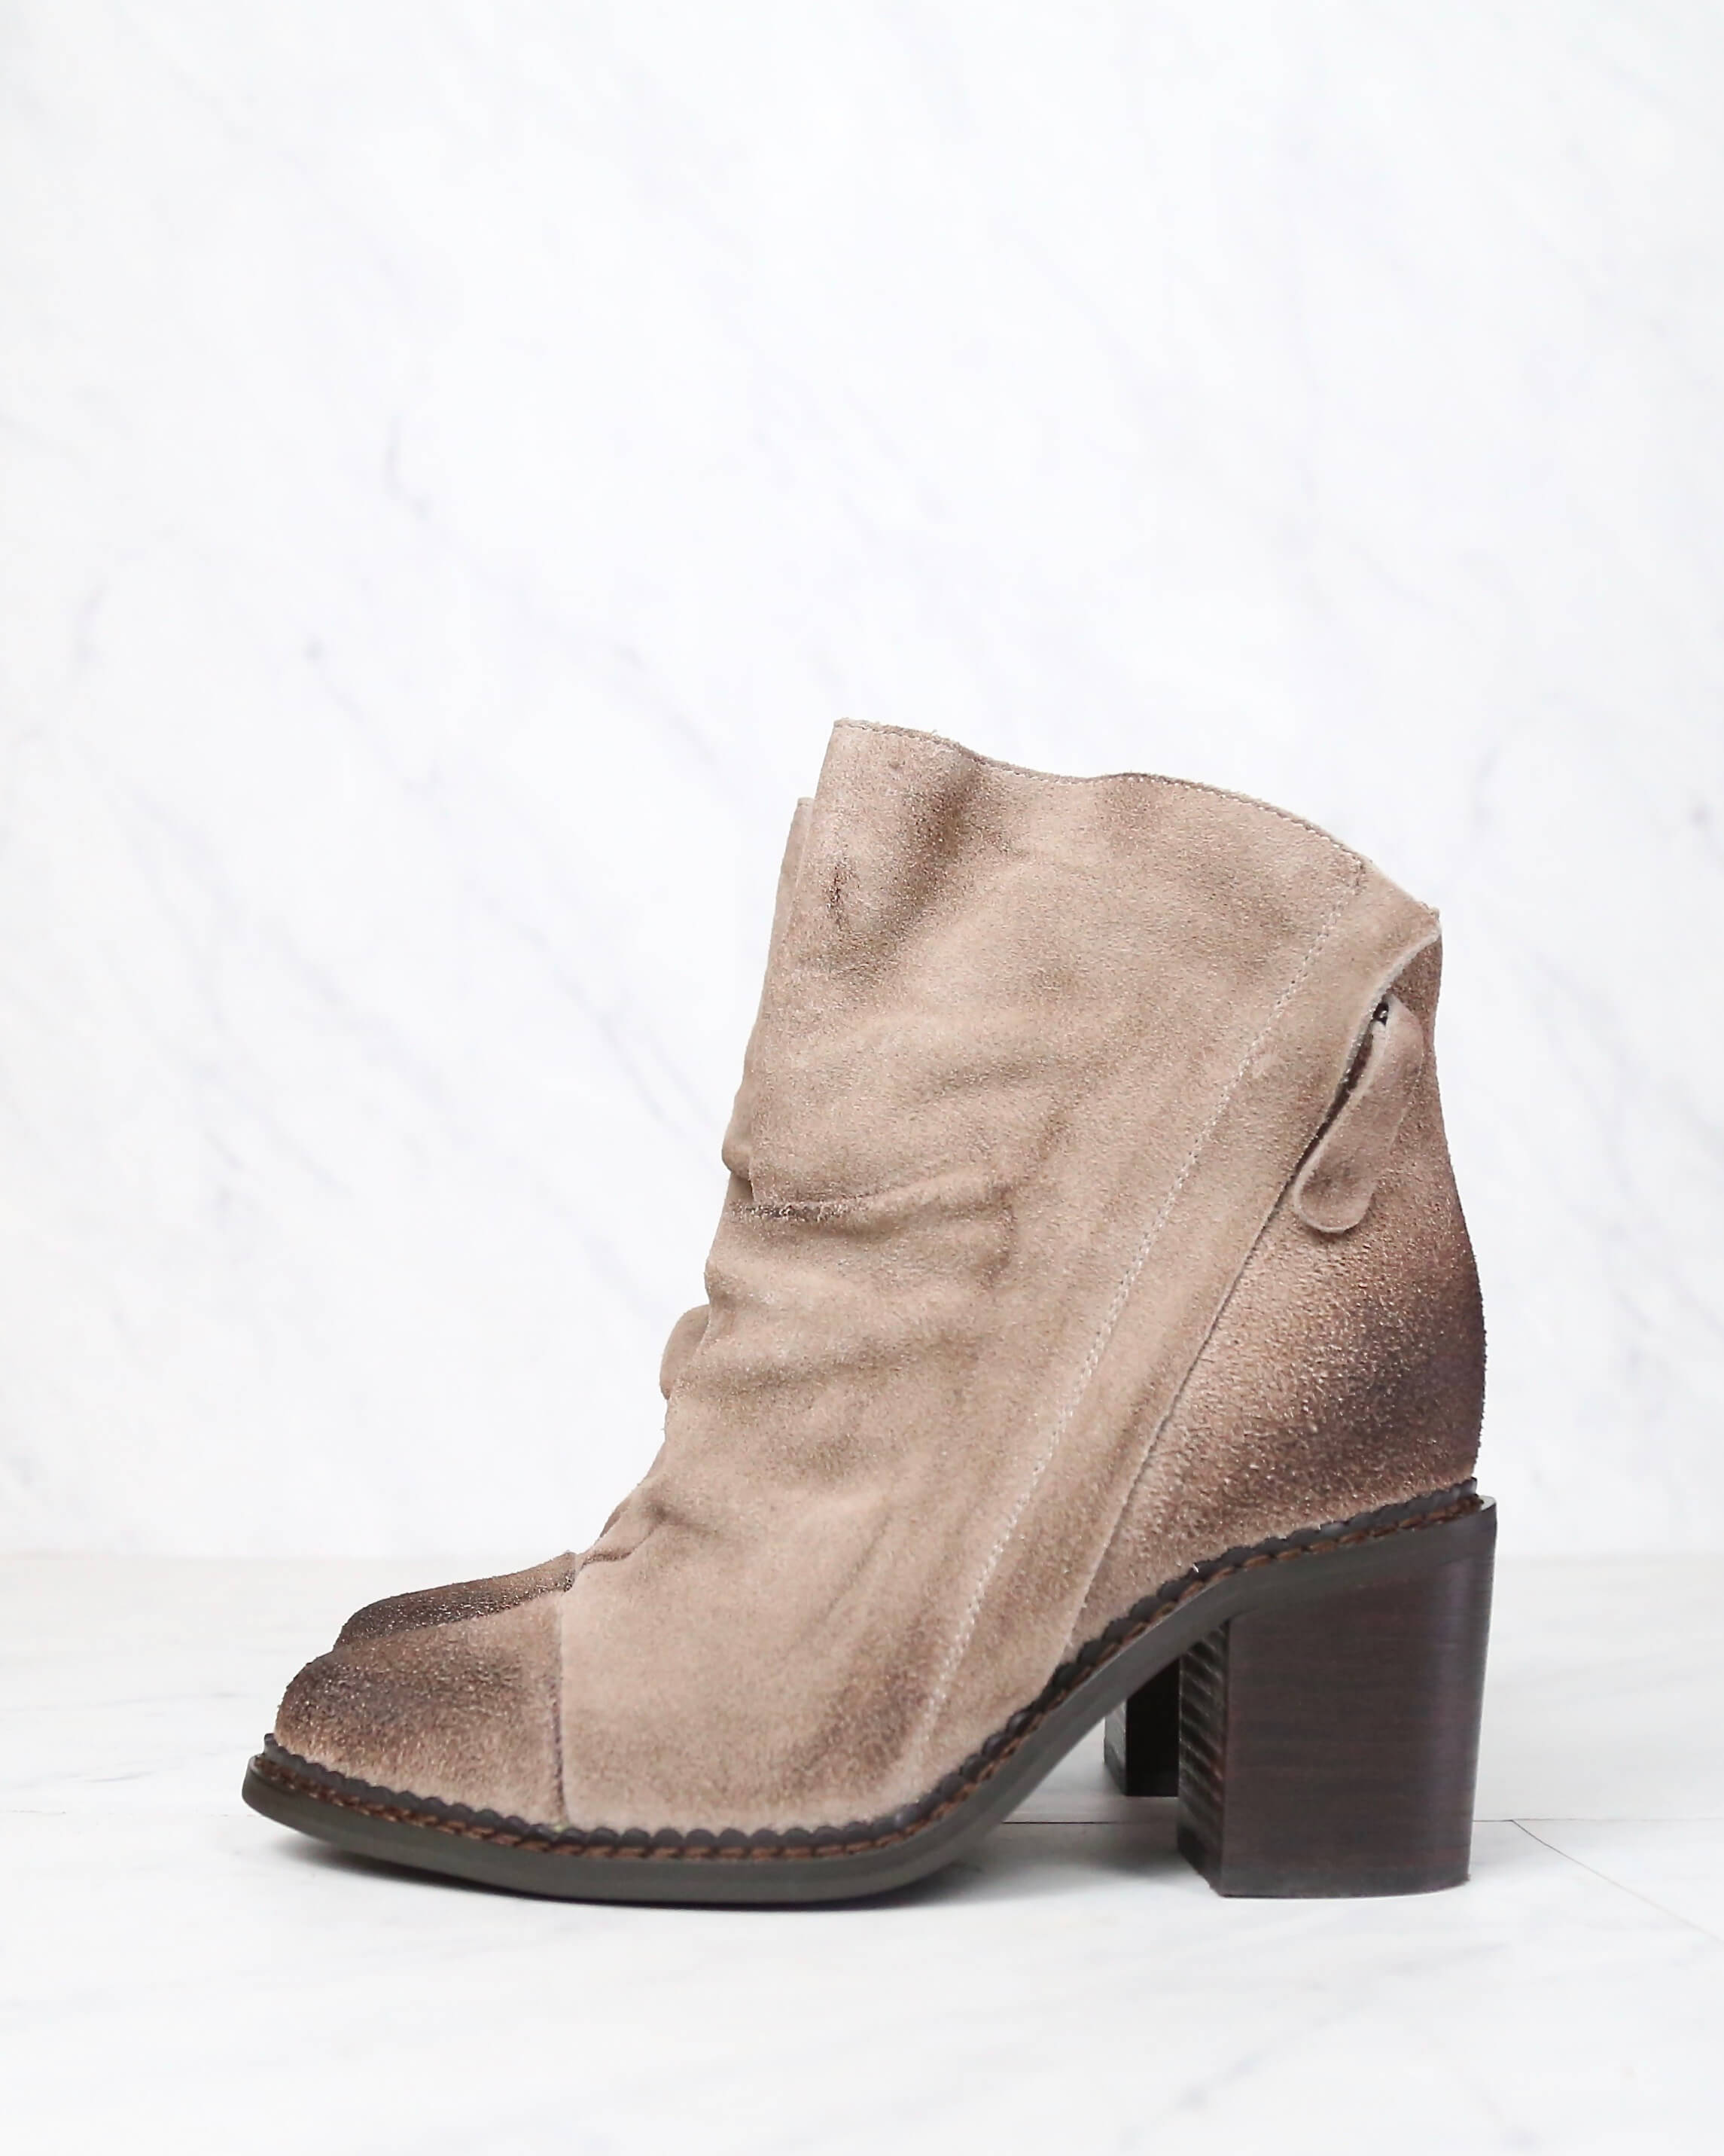 Sbicca - Millie Women's Suede Leather 